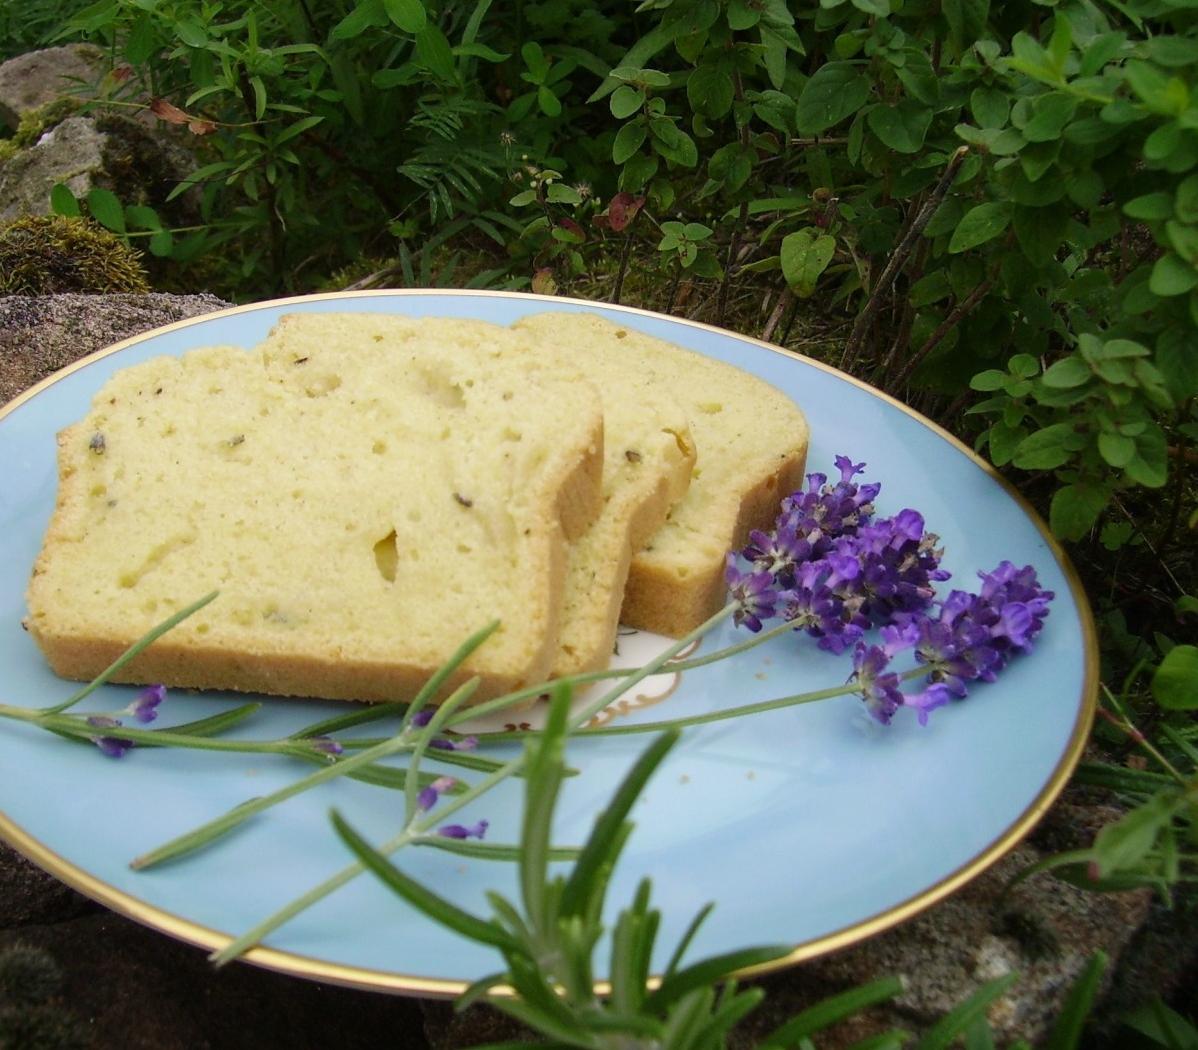  Lavender fields forever! The perfect setting for making this pound cake.